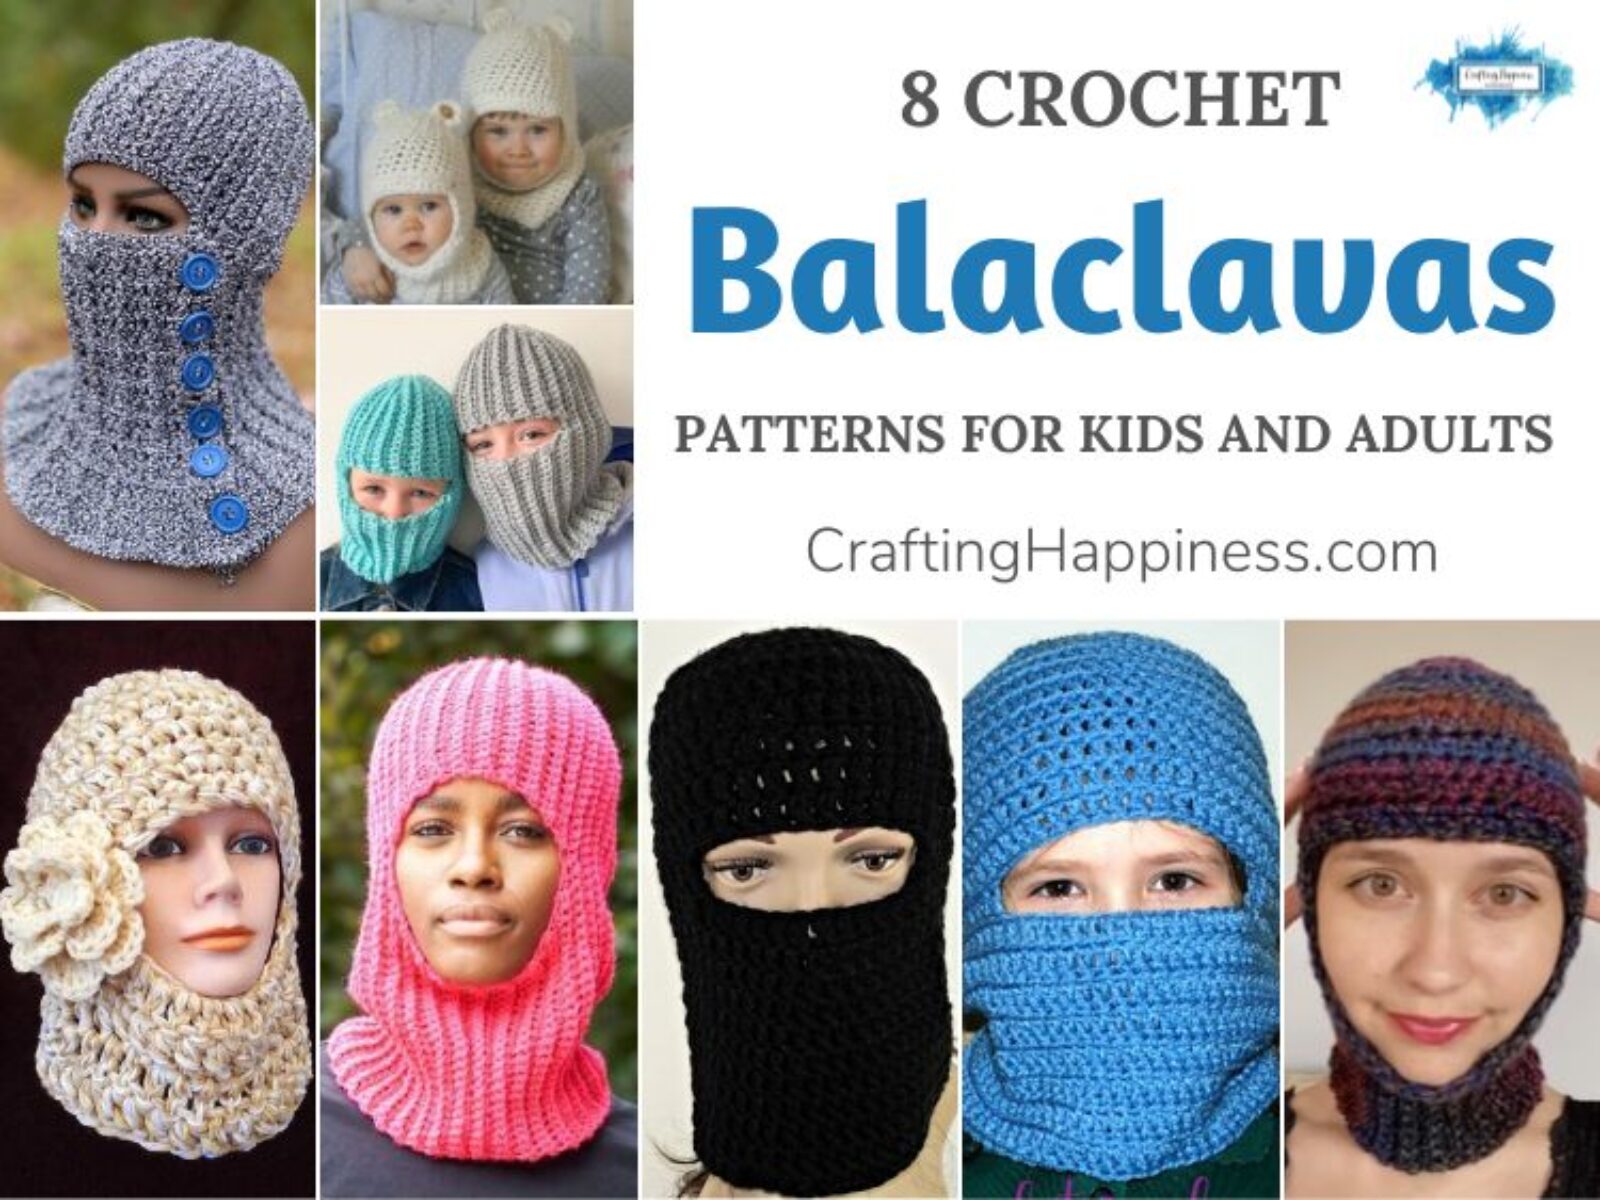 8 Crochet Balaclava Patterns For Kids and Adults FB POSTER